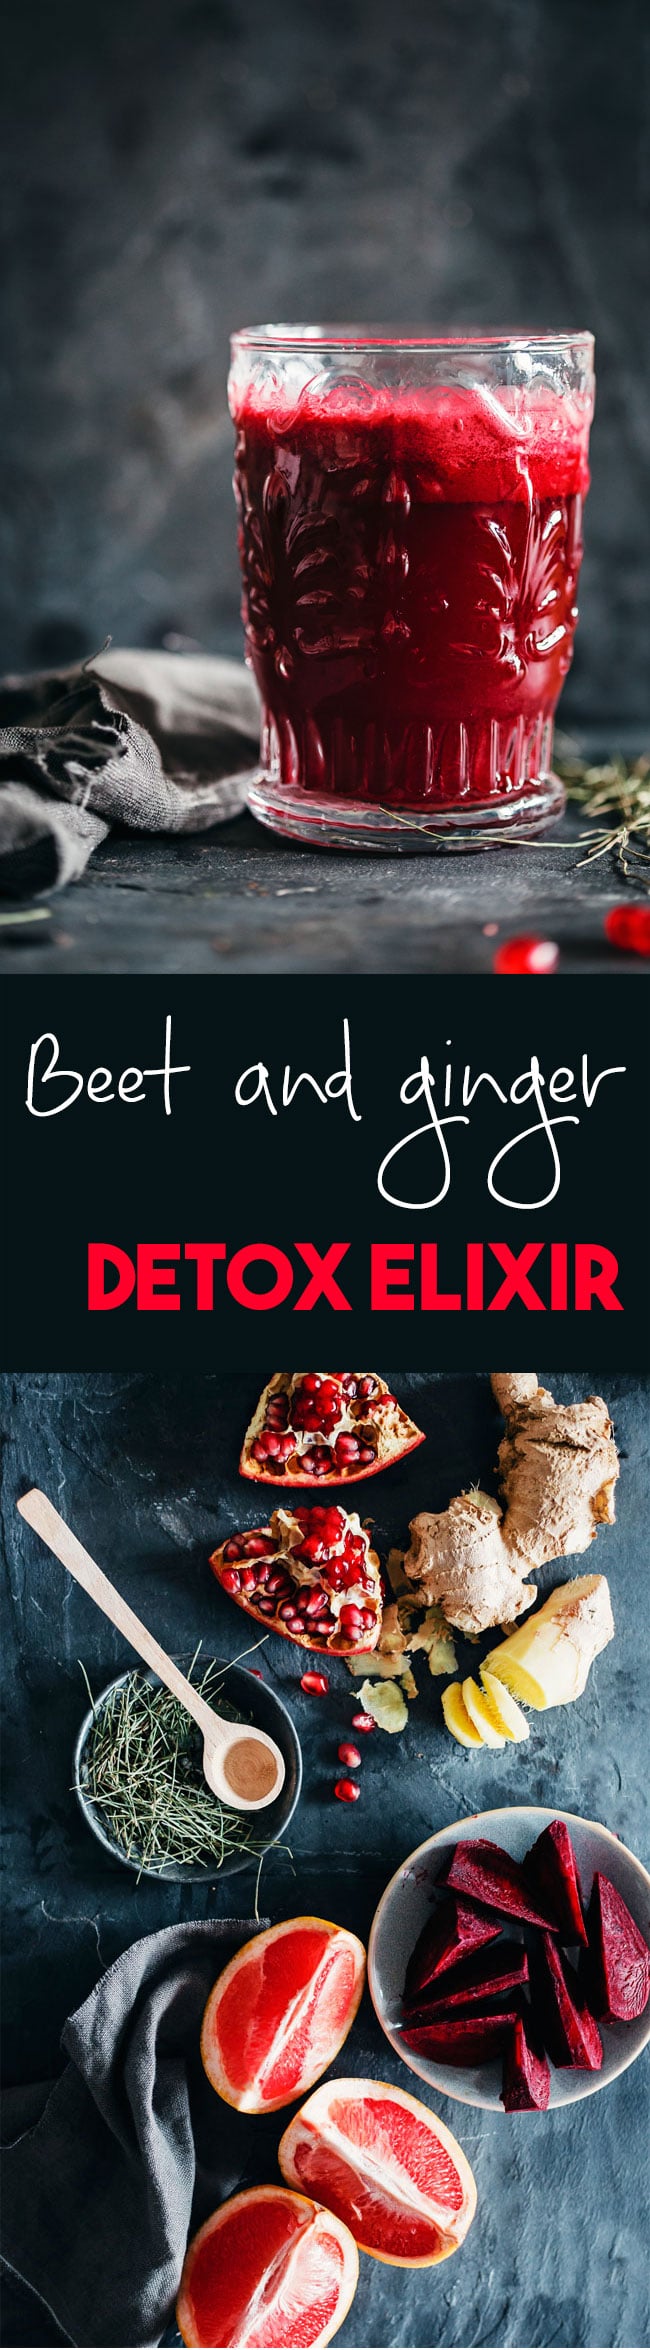 Beet, ginger and herbal tea, a purifying elixir #detox | TheAwesomeGreen.com